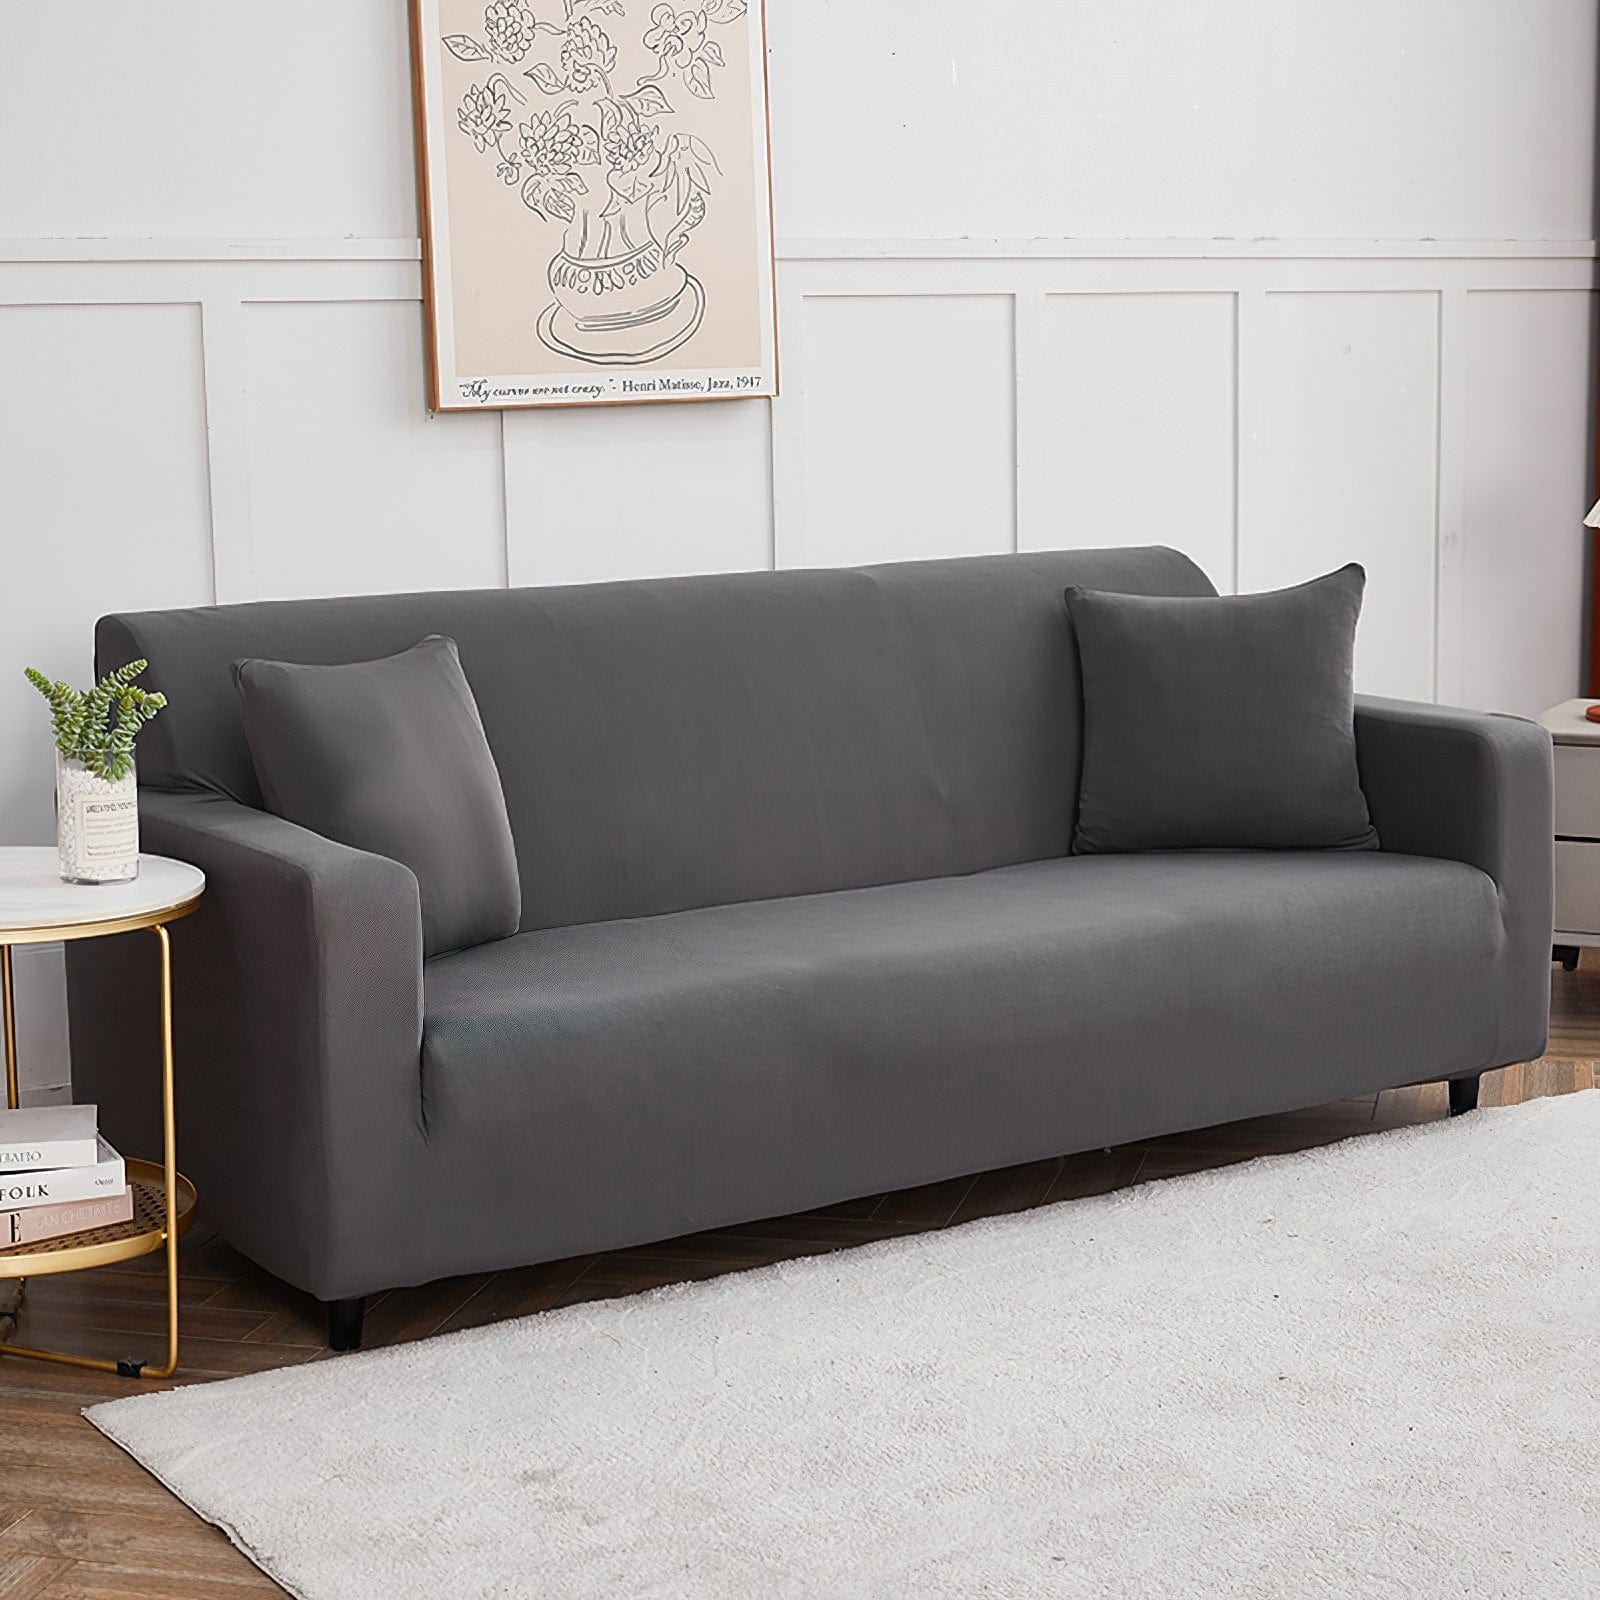 Dark grey - Extendable Armchair and Sofa Covers - The Sofa Cover House